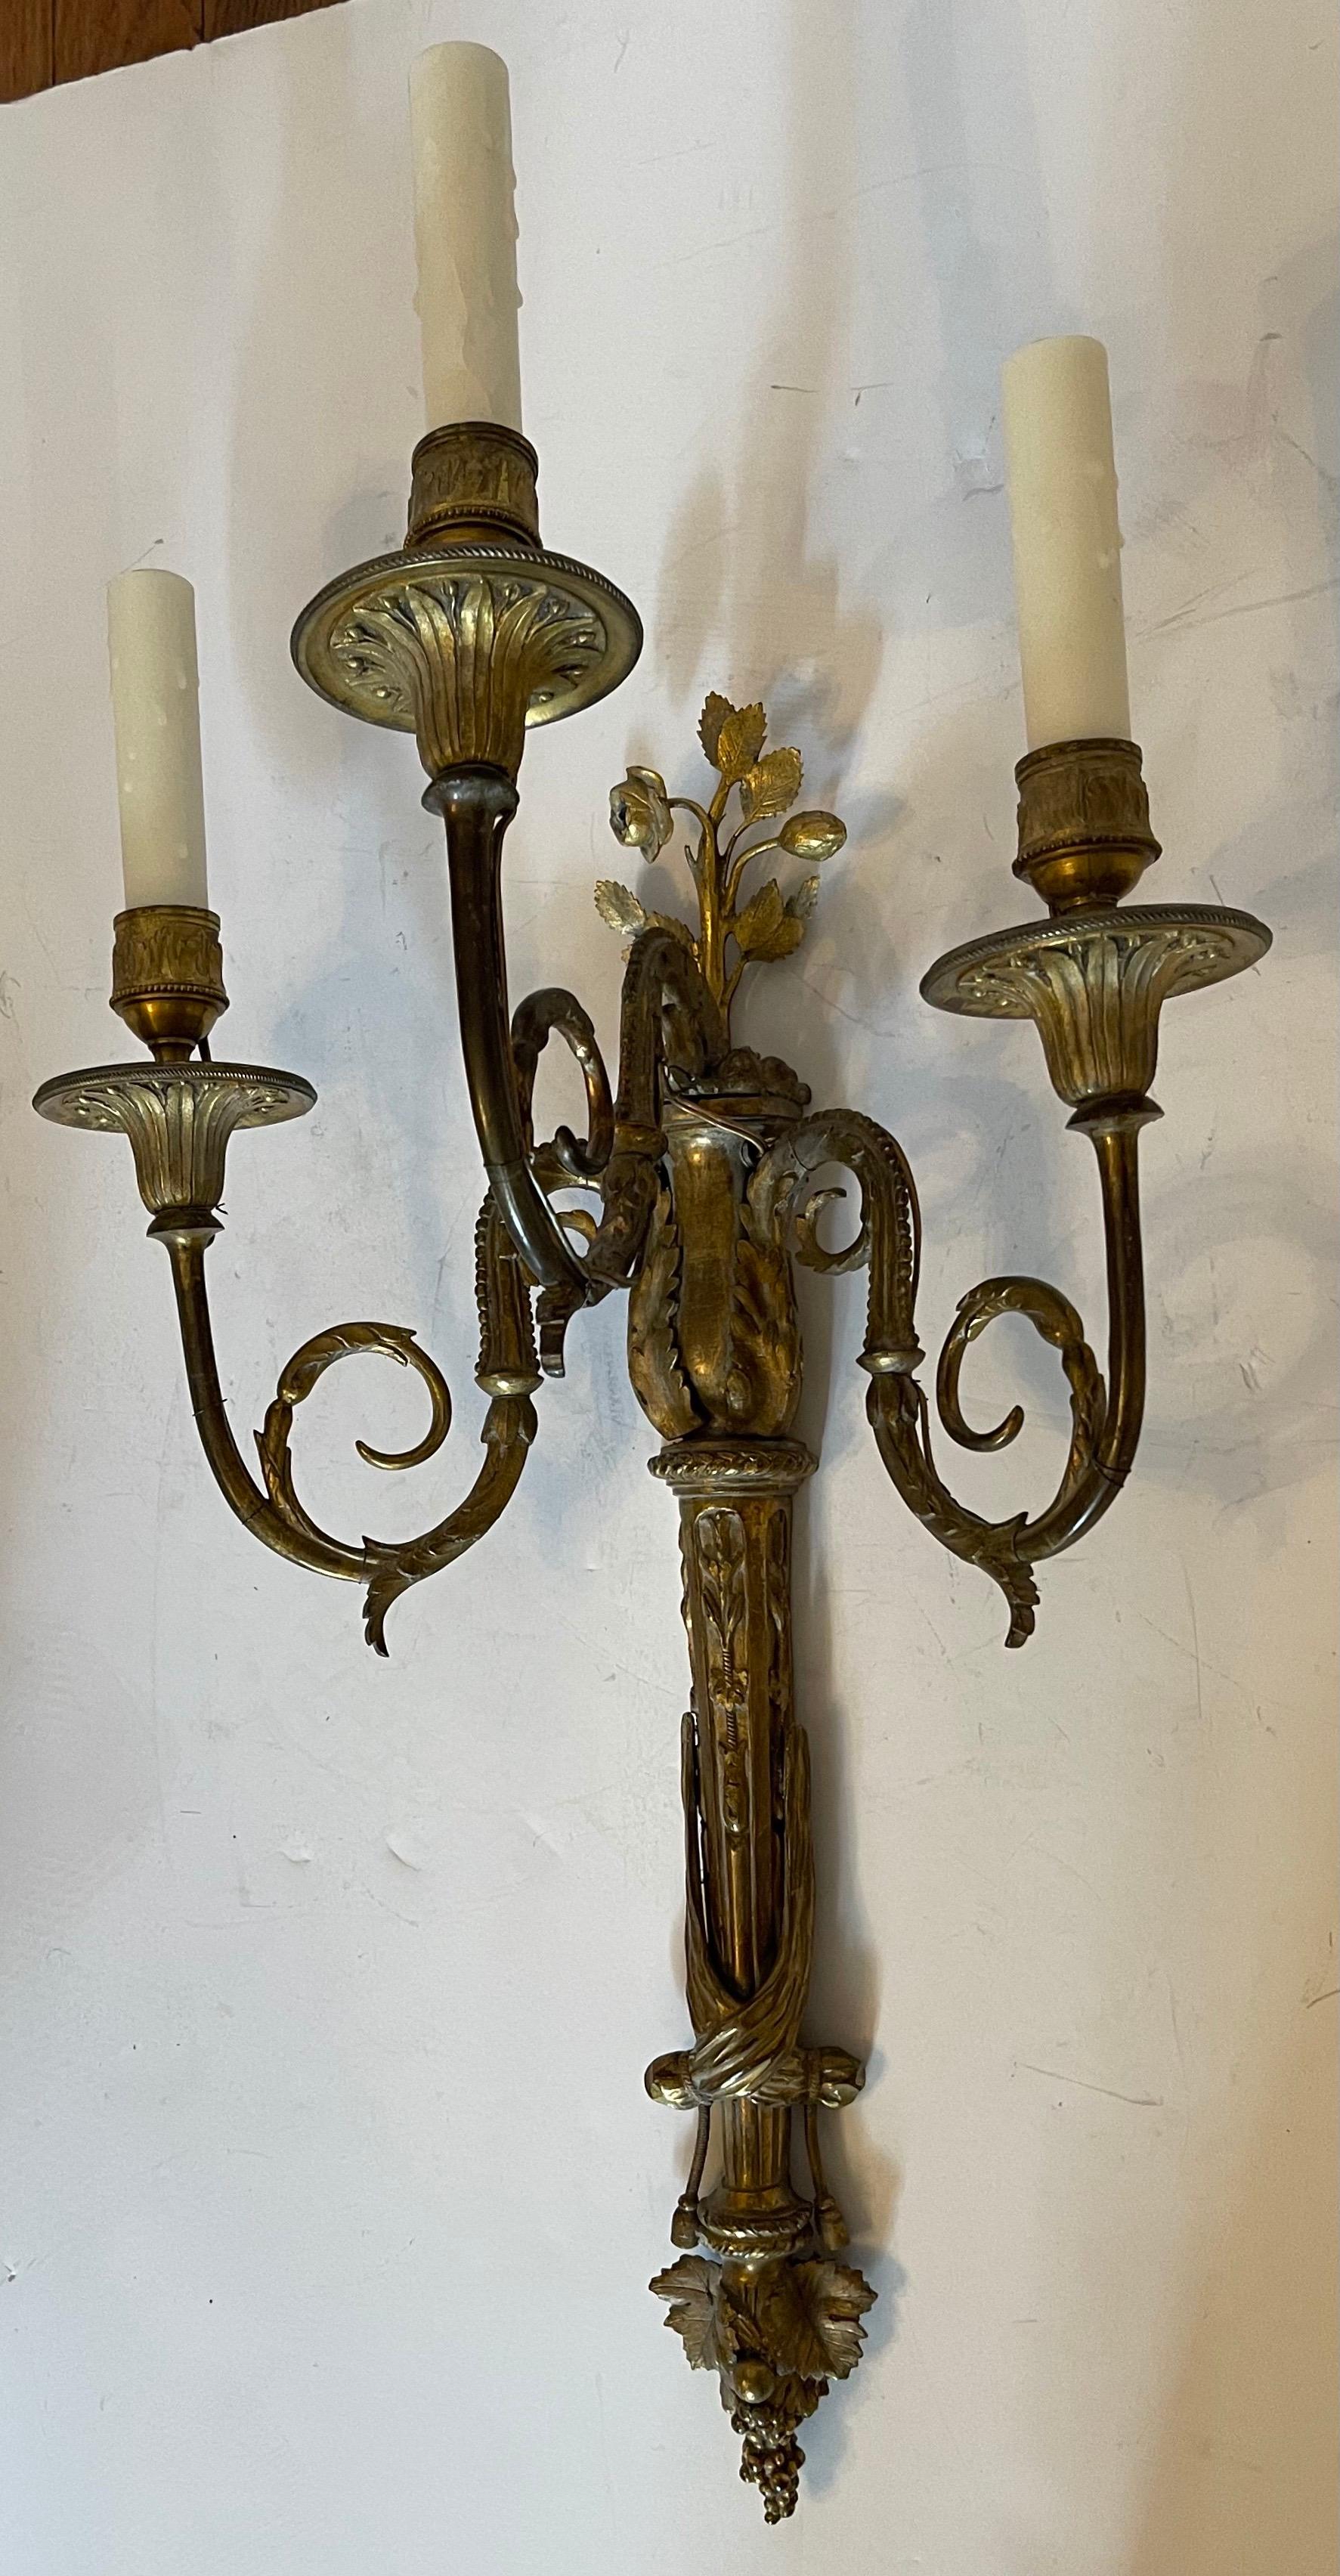 A Wonderful large pair of French Empire Dore bronze Torchiere neoclassical tassel three candelabra light sconces.